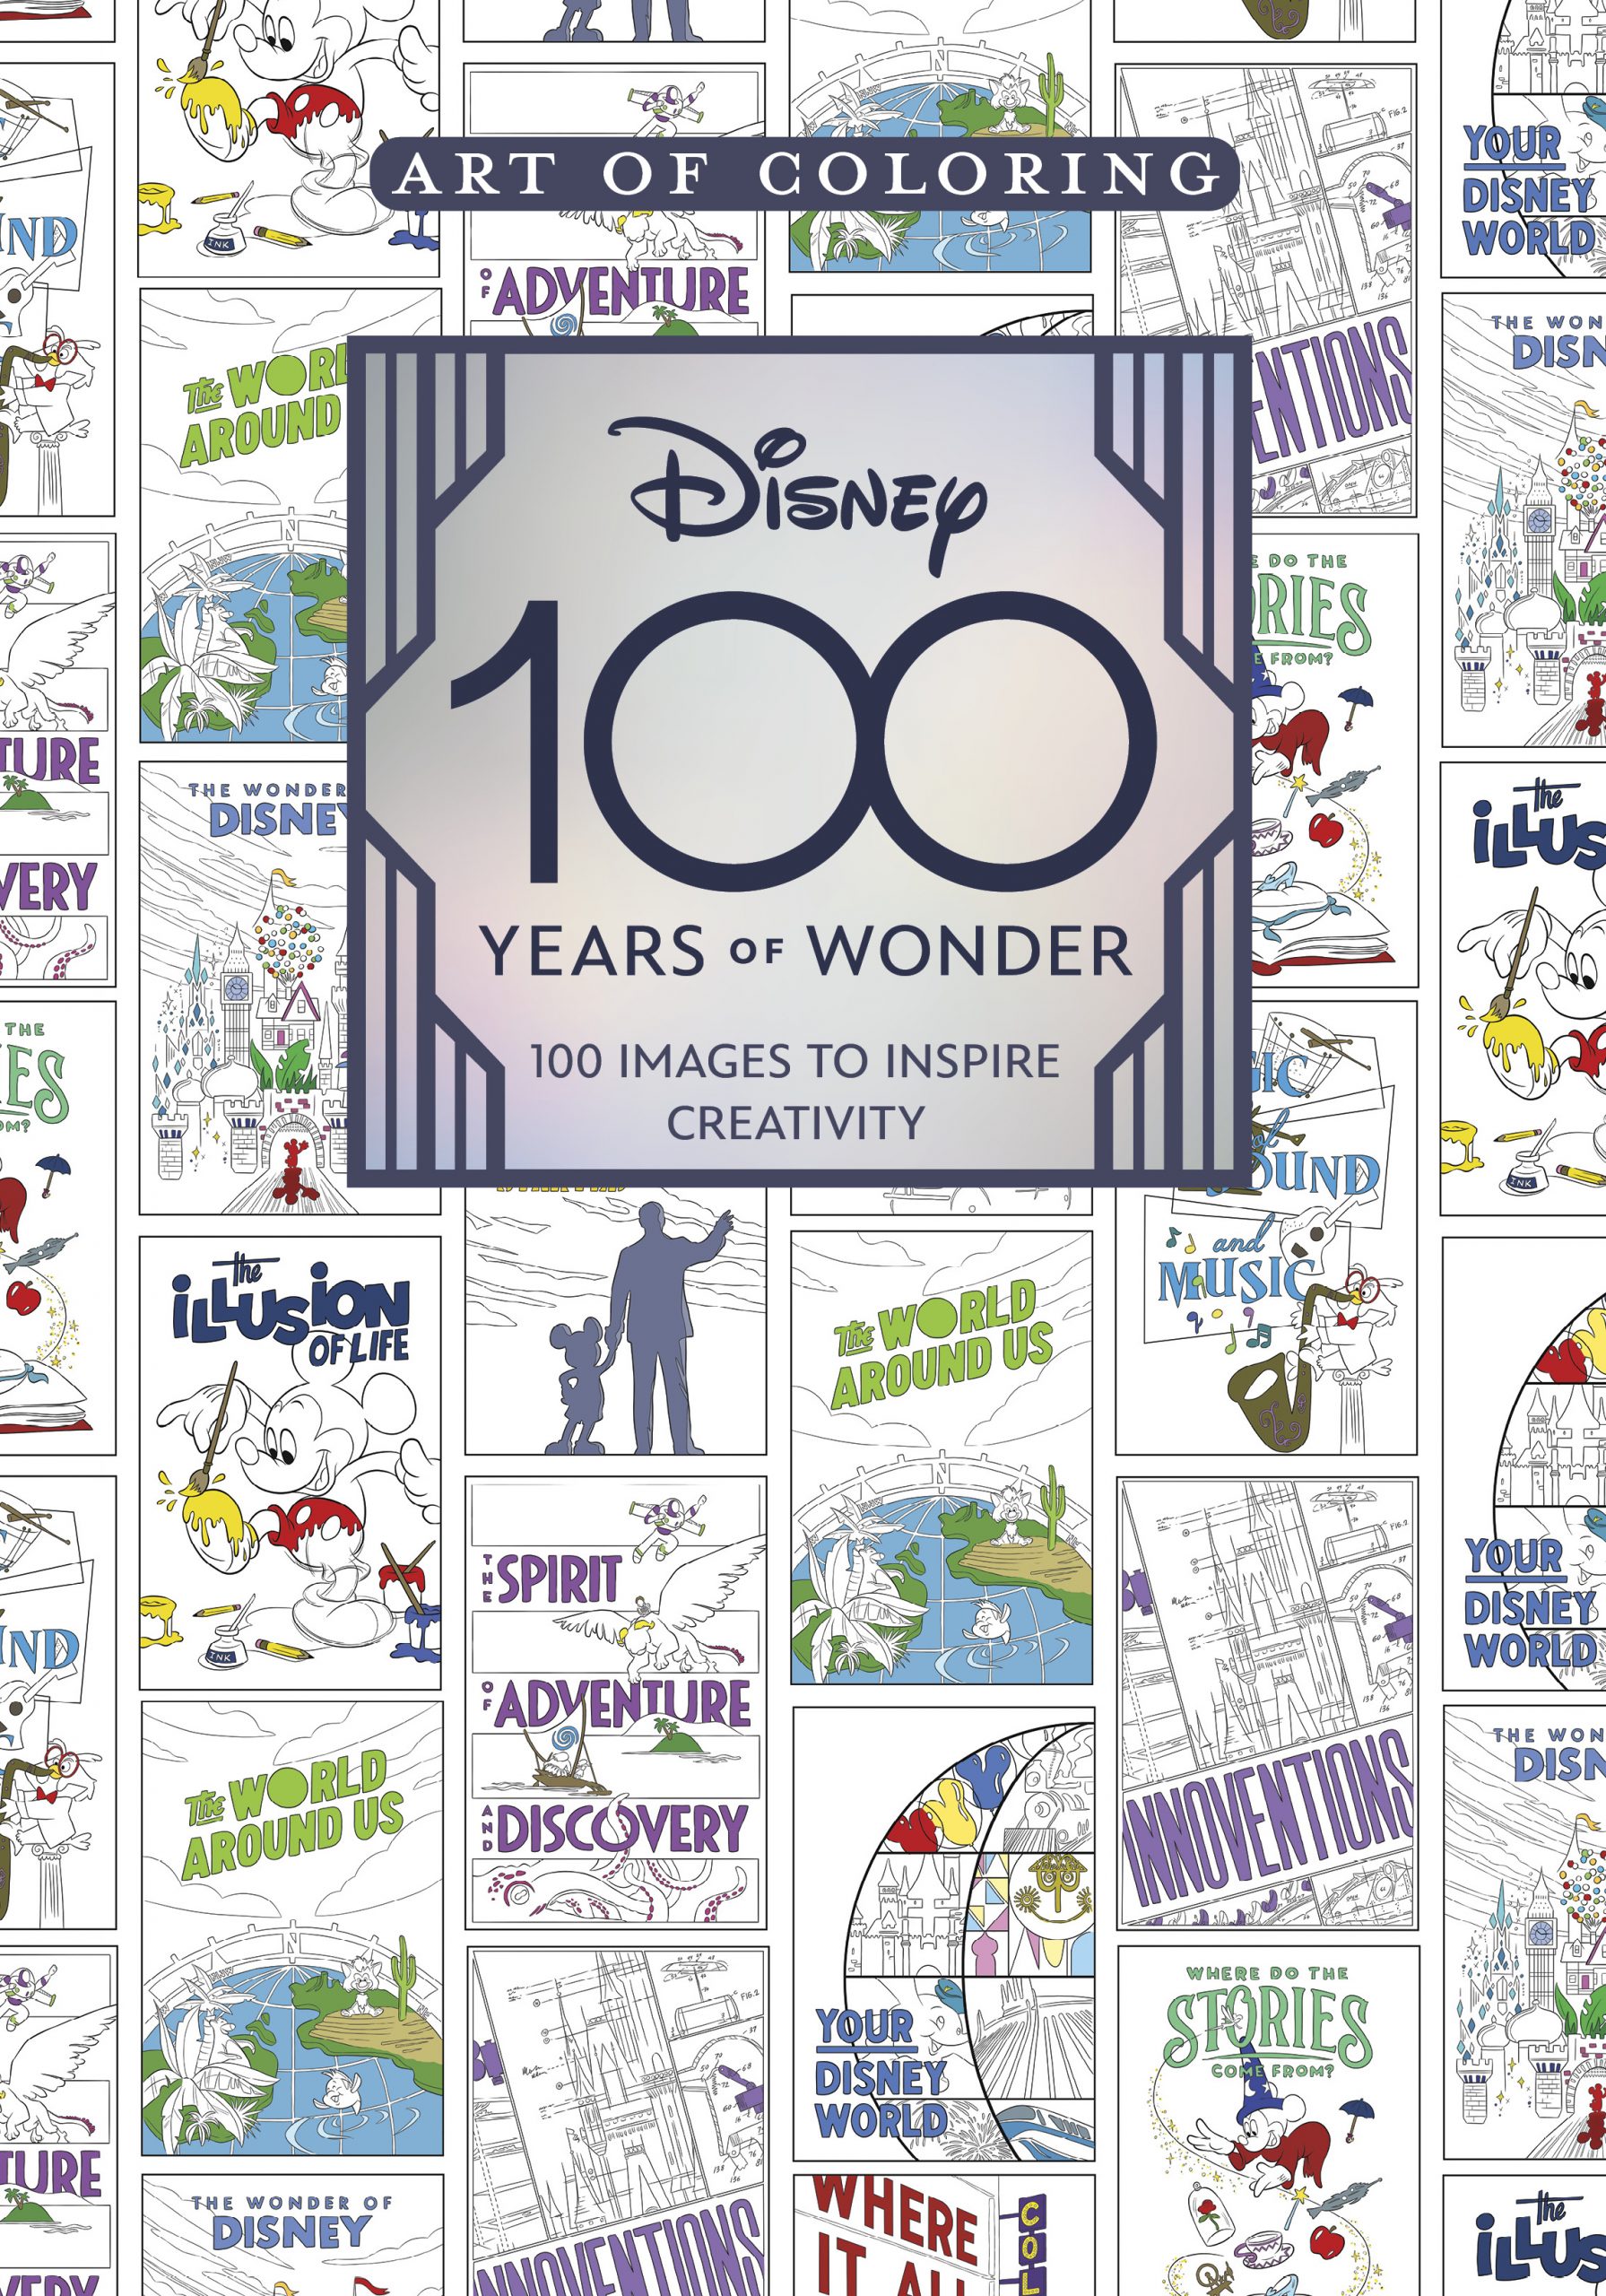 Art of Coloring: Disney 100 Years of Wonder 100 Images to Inspire  Creativity by Staff of the Walt Disney Archives - Art of Coloring - Books